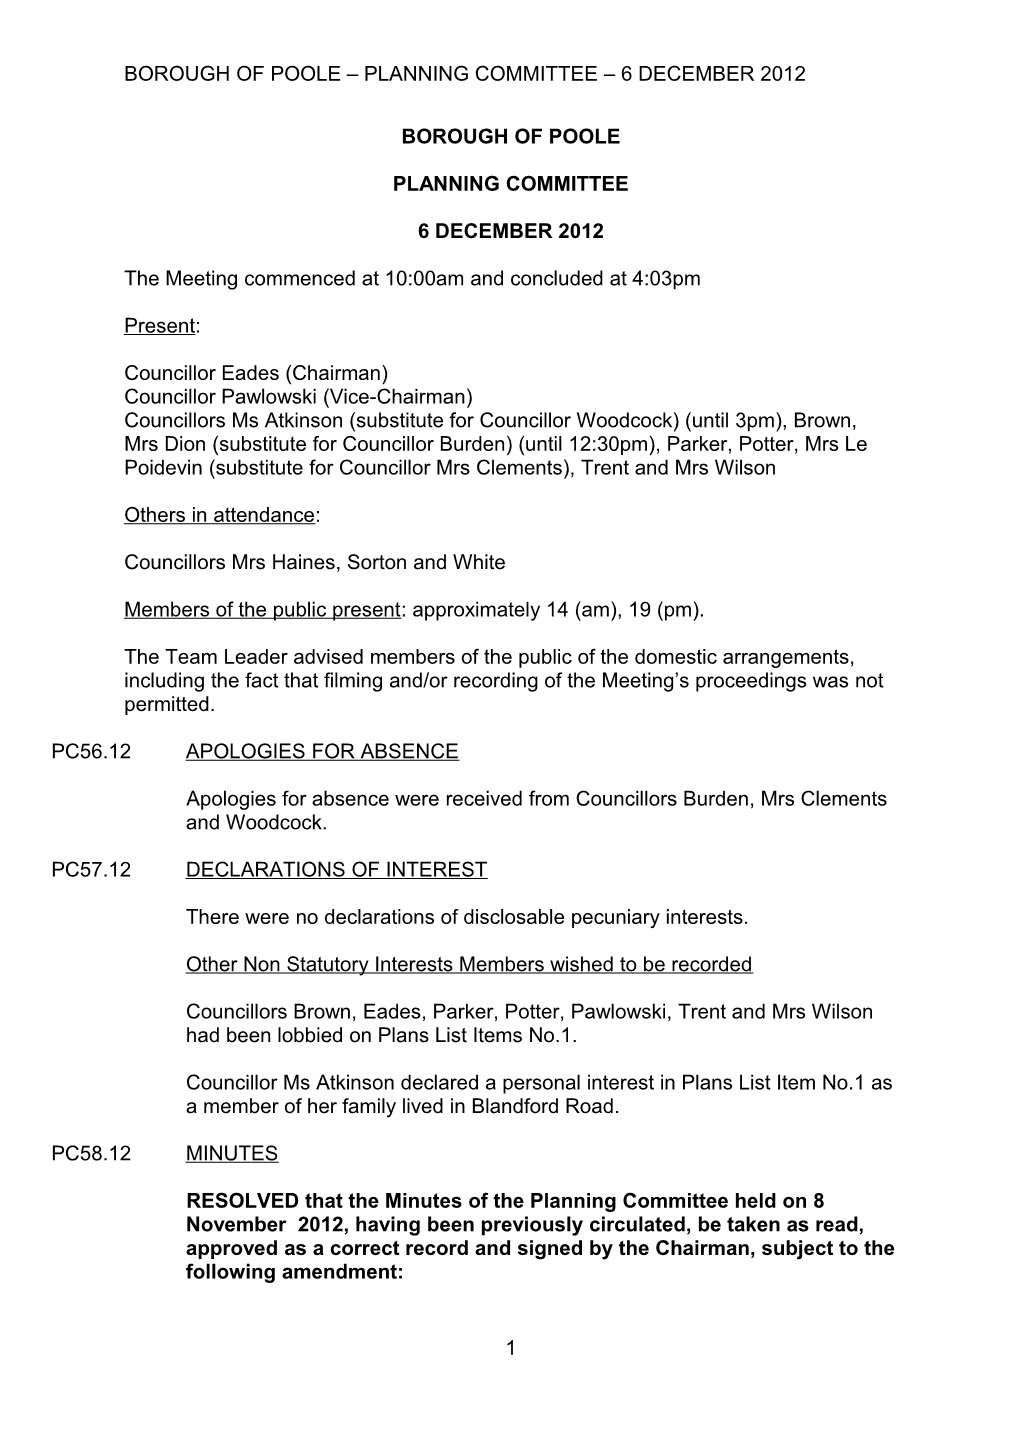 Borough of Poole Planning Committee 6 December 2012